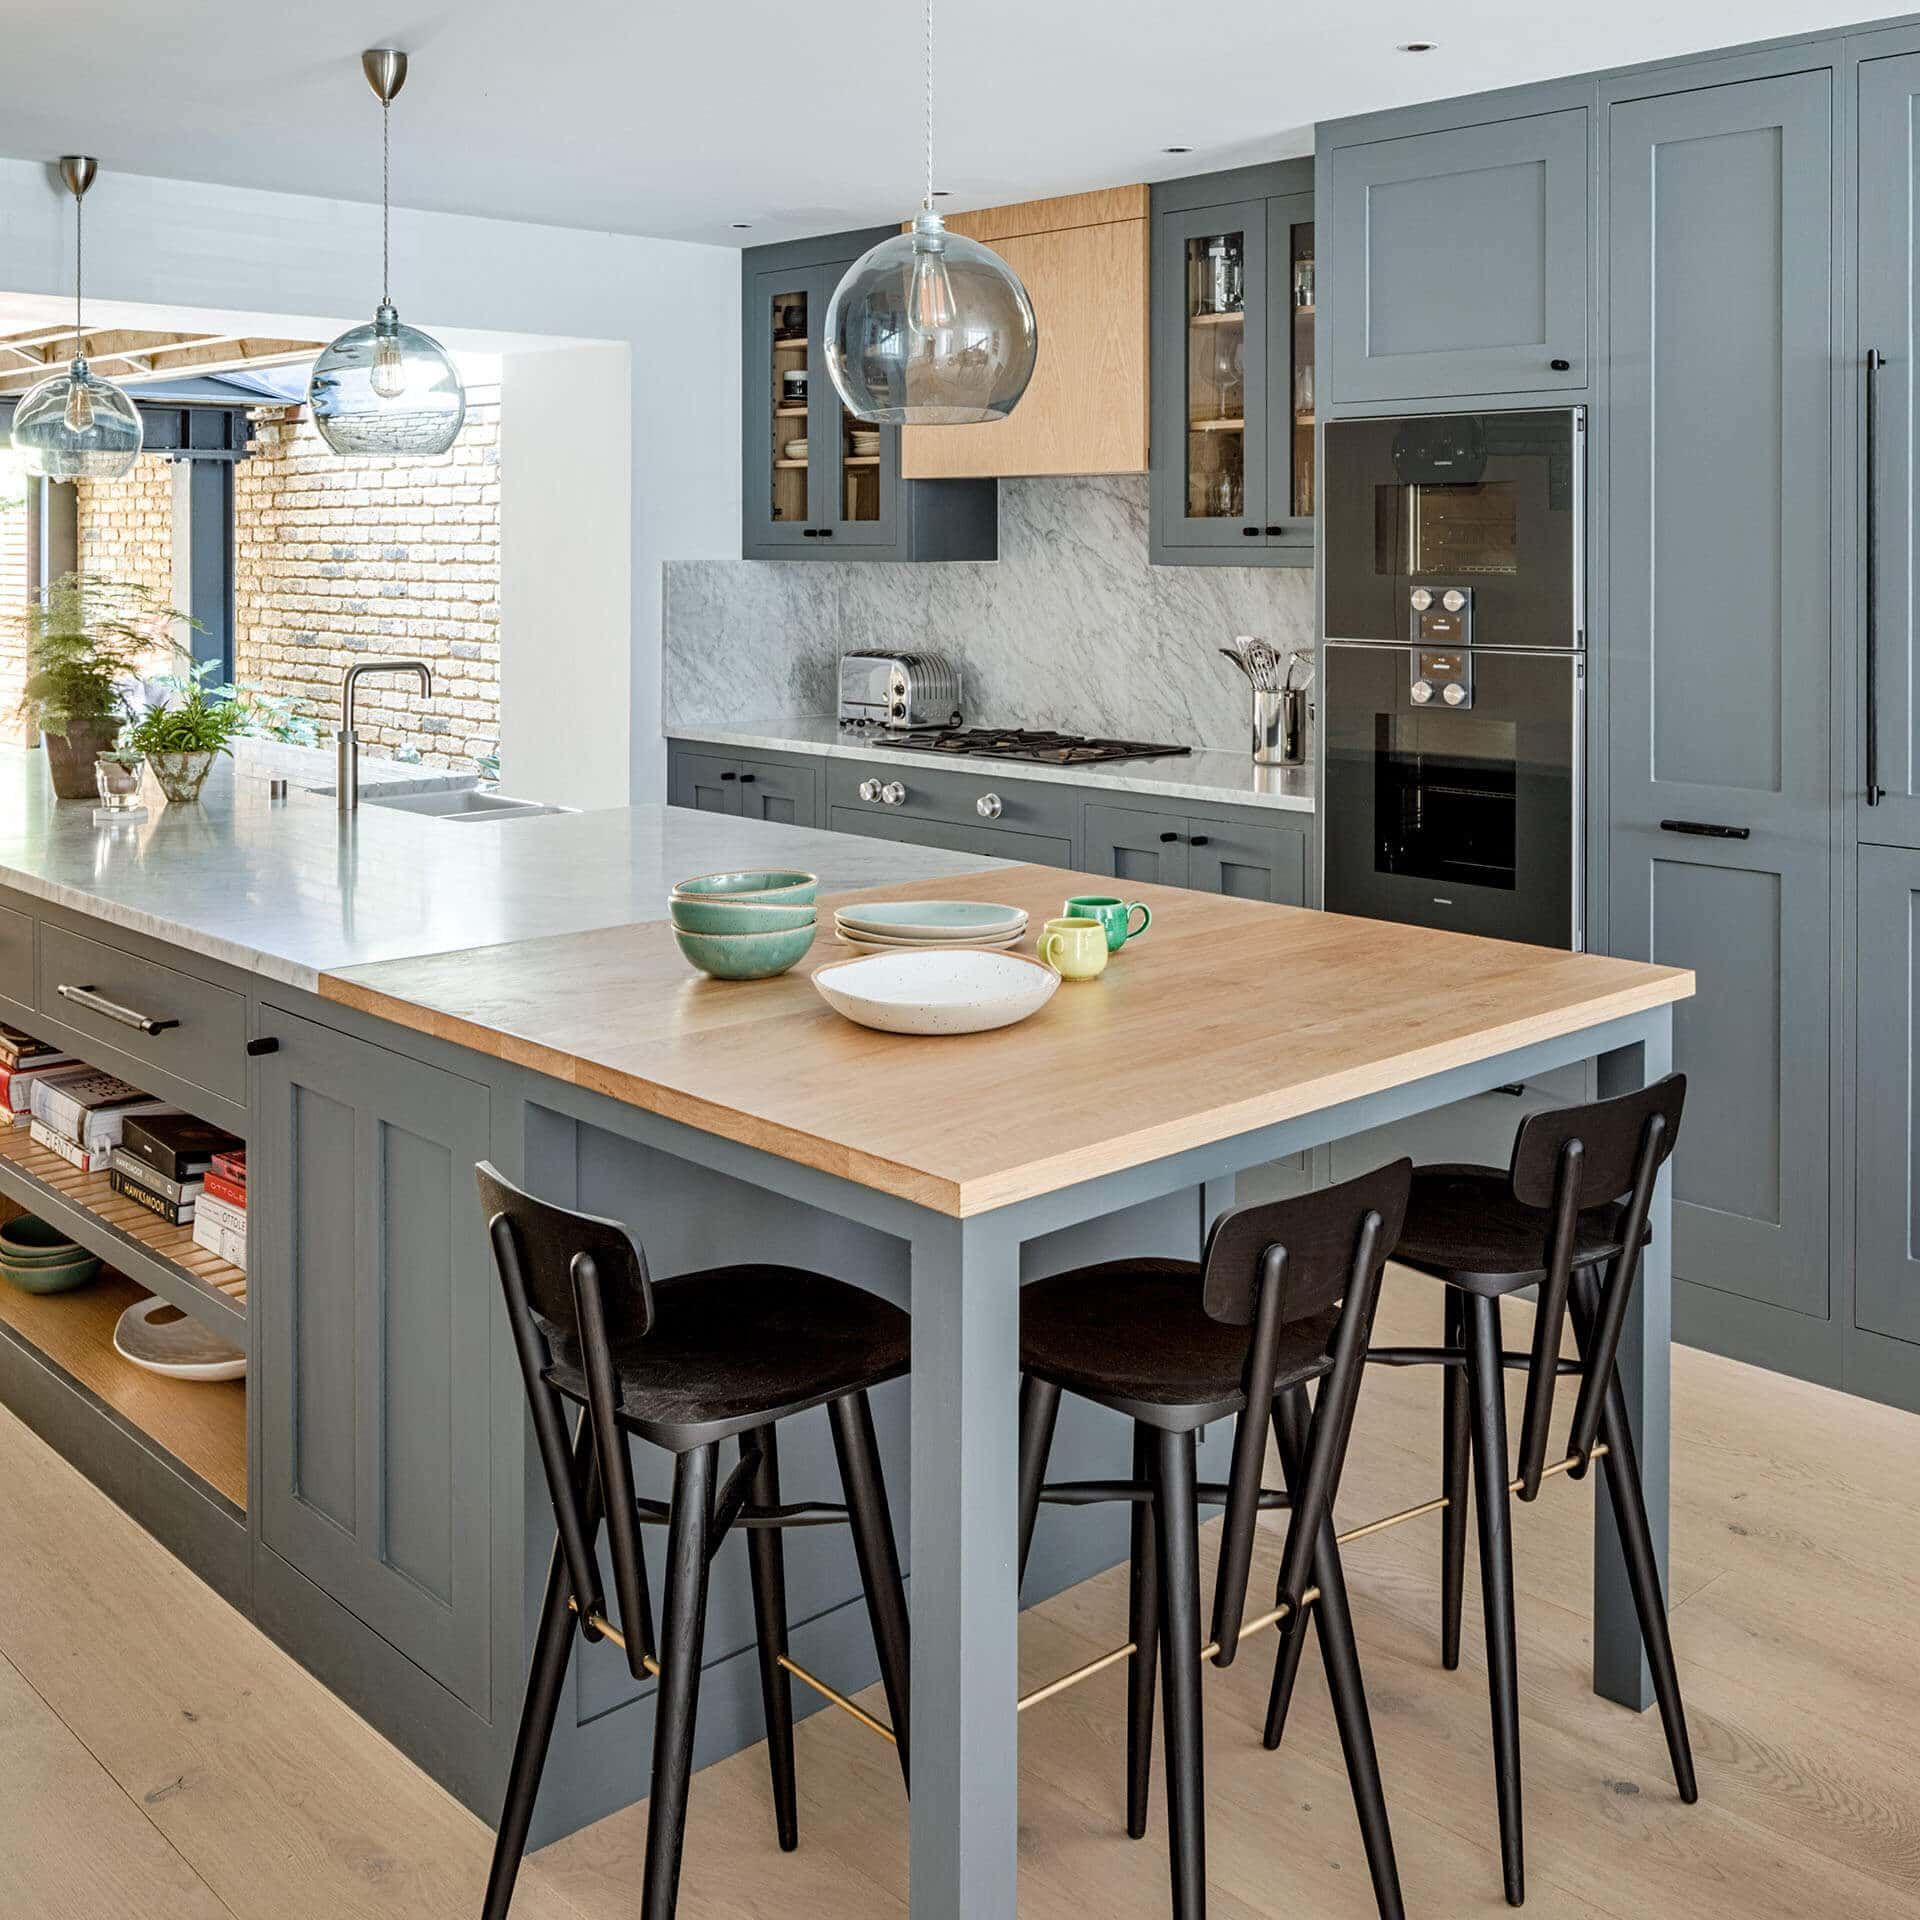 Discover the Benefits of a Kitchen Island with Seating